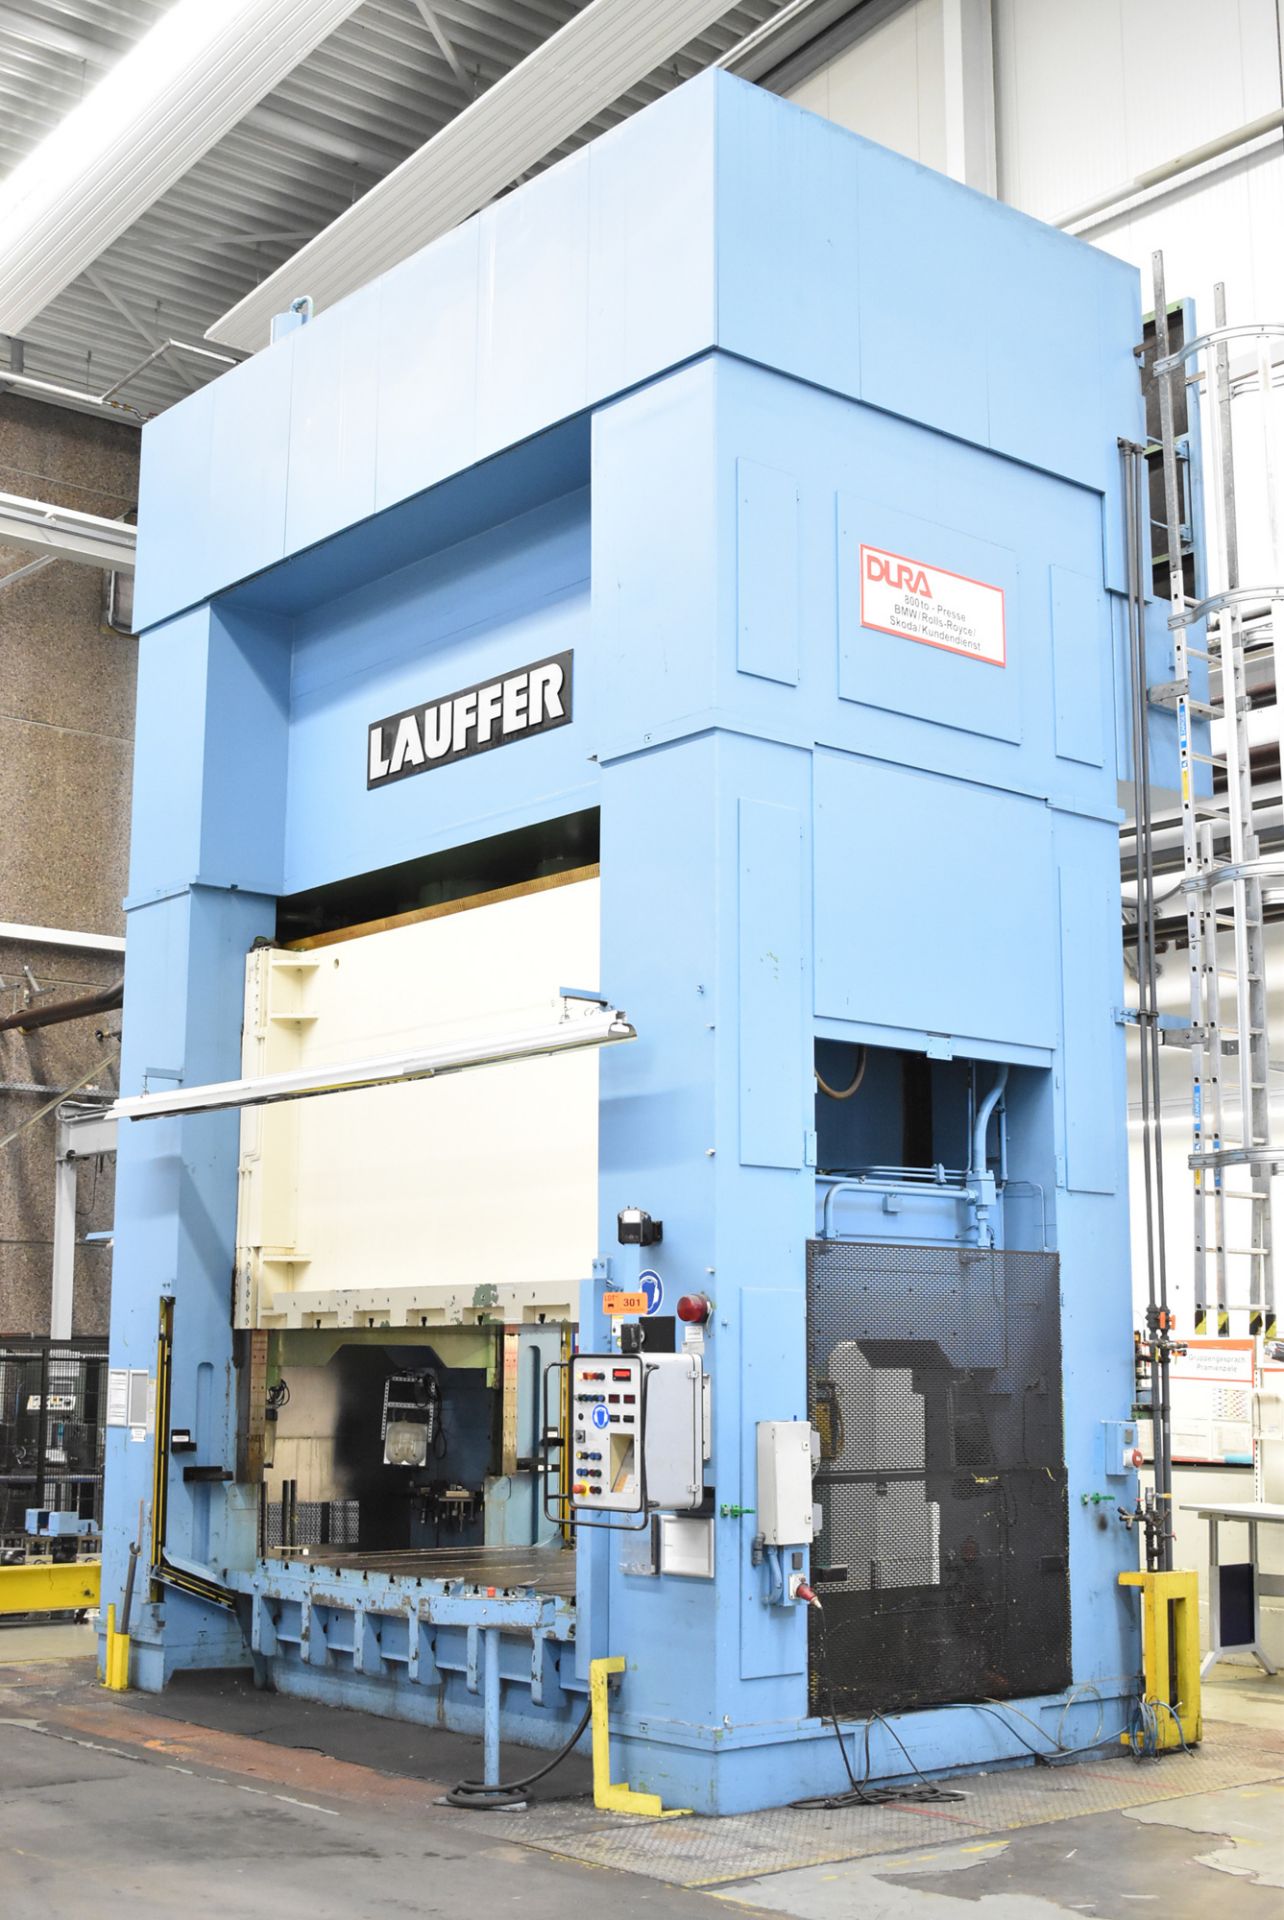 LAUFER (1989) RZUN 800 STRAIGHT SIDE DOWN ACTING HYDRAULIC PRESS WITH 800 TON CAPACITY, SIEMENS - Image 3 of 15